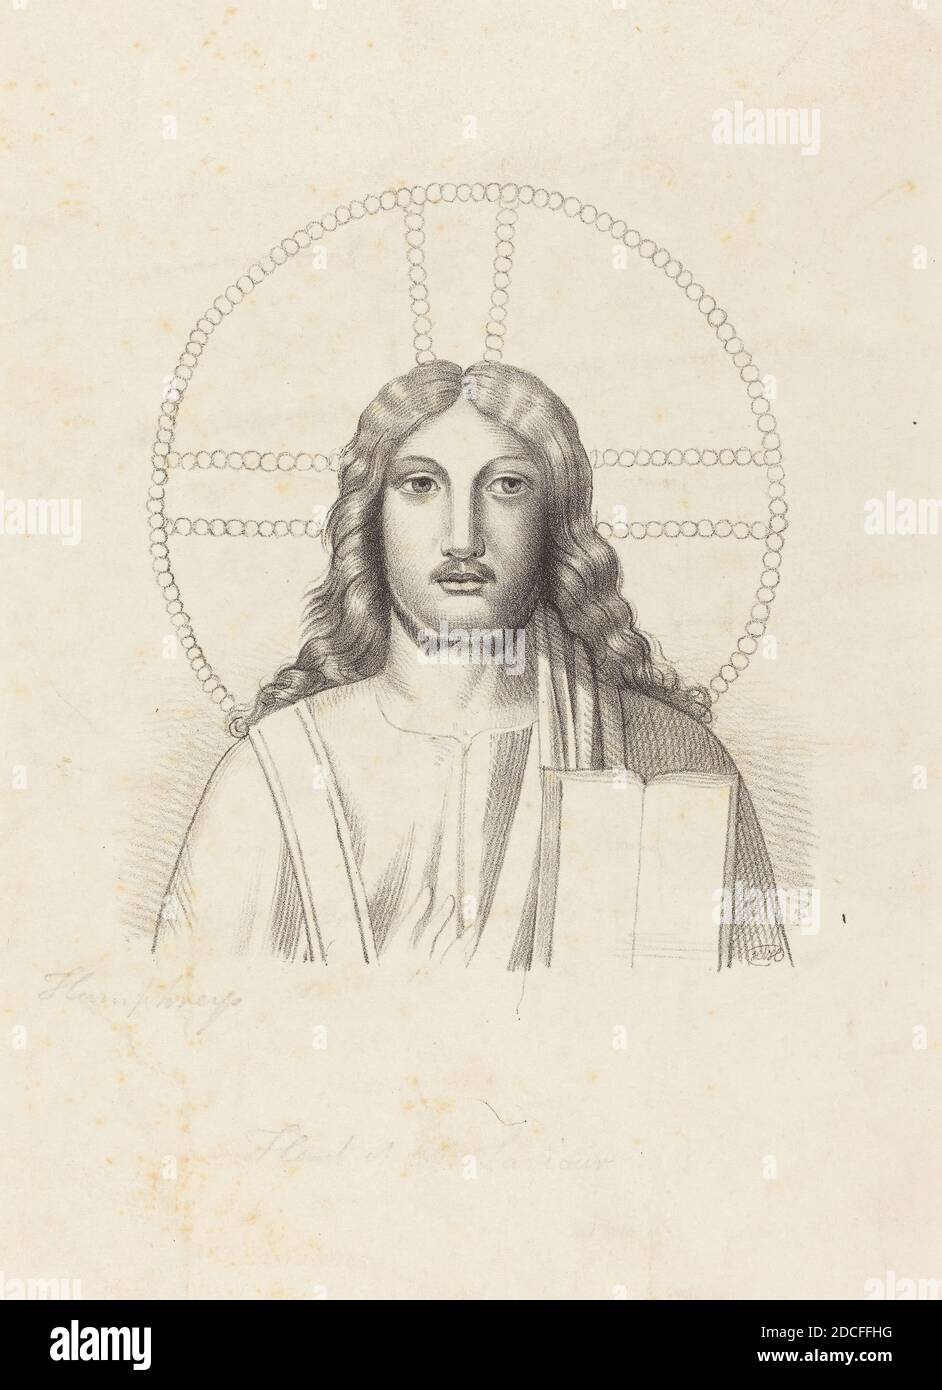 Henry Noel Humphreys, (artist), British, 1810 - 1879, John Flaxman, (artist after), British, 1755 - 1826, Head of Our Savior, from Arringhi's 'Roma Subterranea', Flaxman's 'Lectures on Sculpture:' pl.49, (series), published 1829, lithograph Stock Photo